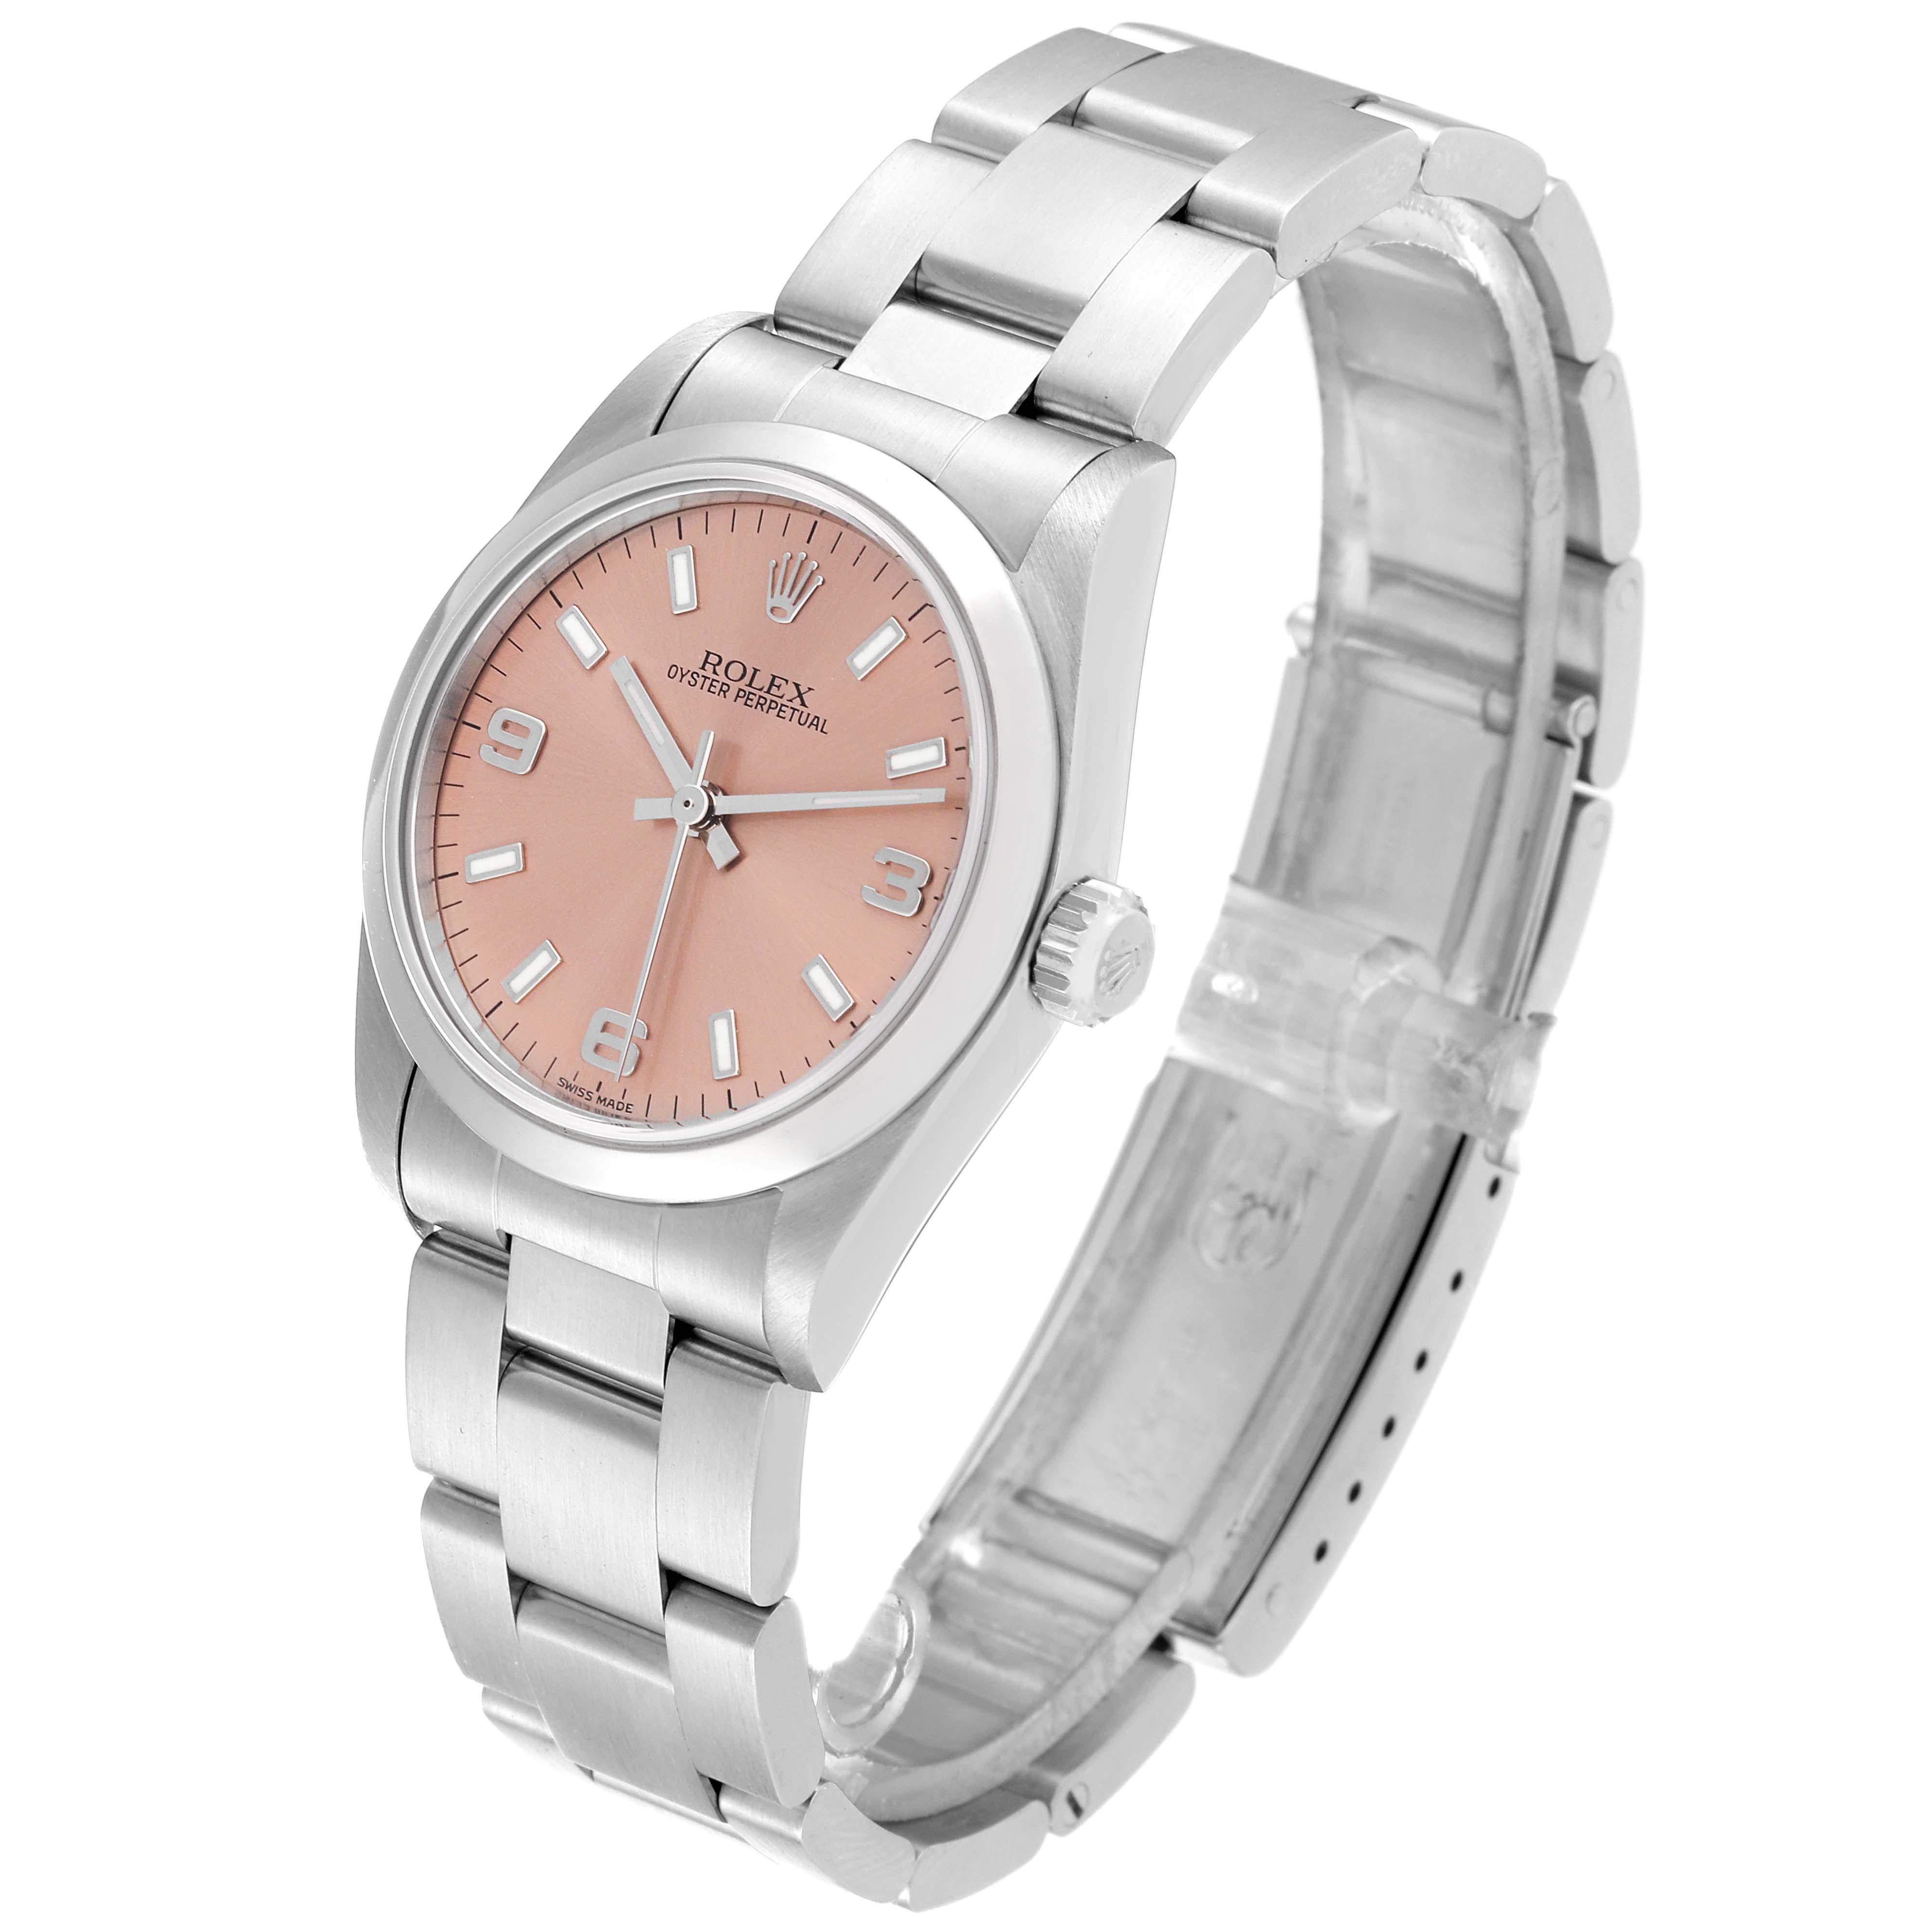 Rolex Oyster Perpetual Midsize Salmon Dial Steel Ladies Watch 77080. Officially certified chronometer automatic self-winding movement. Stainless steel oyster case 31.0 mm in diameter. Rolex logo on the crown. Stainless steel smooth bezel. Scratch